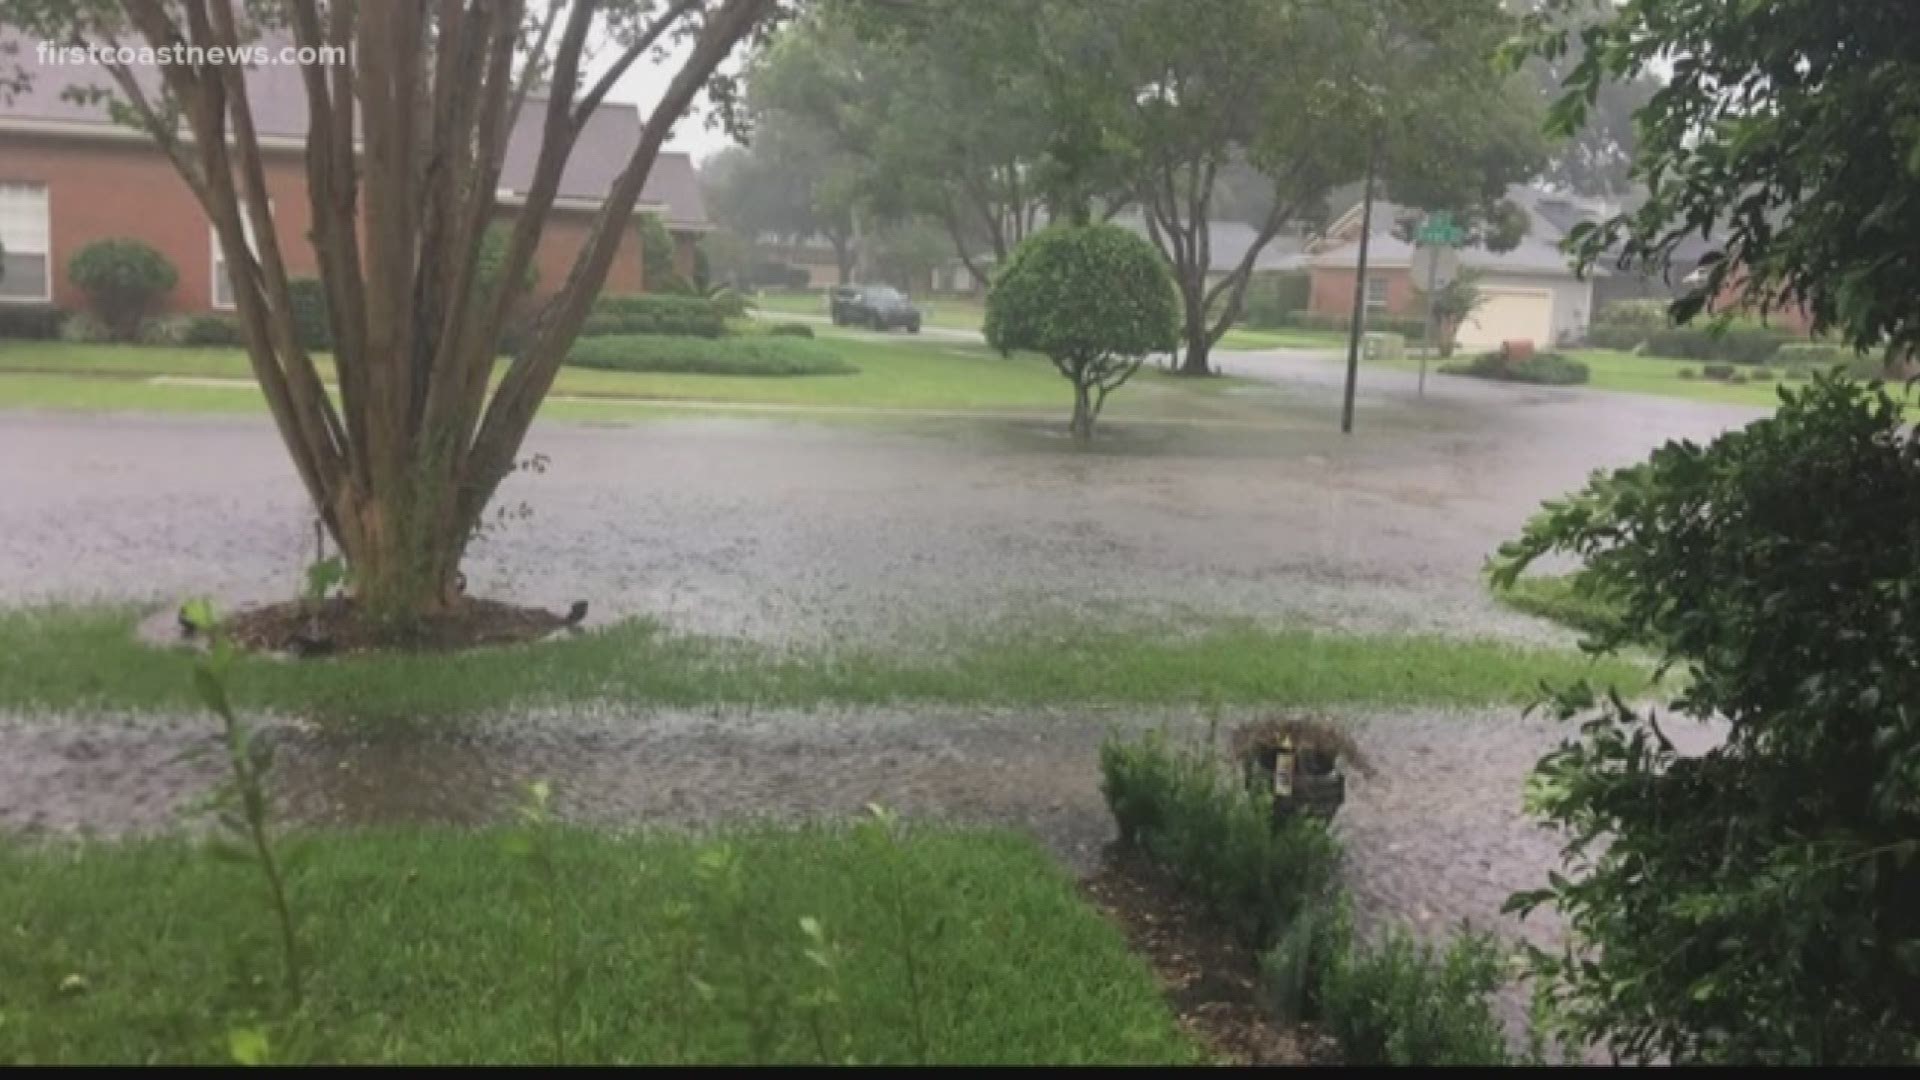 A Florida afternoon thunderstorm turns several streets in the Barrington Oaks subdivision into a flood zone.